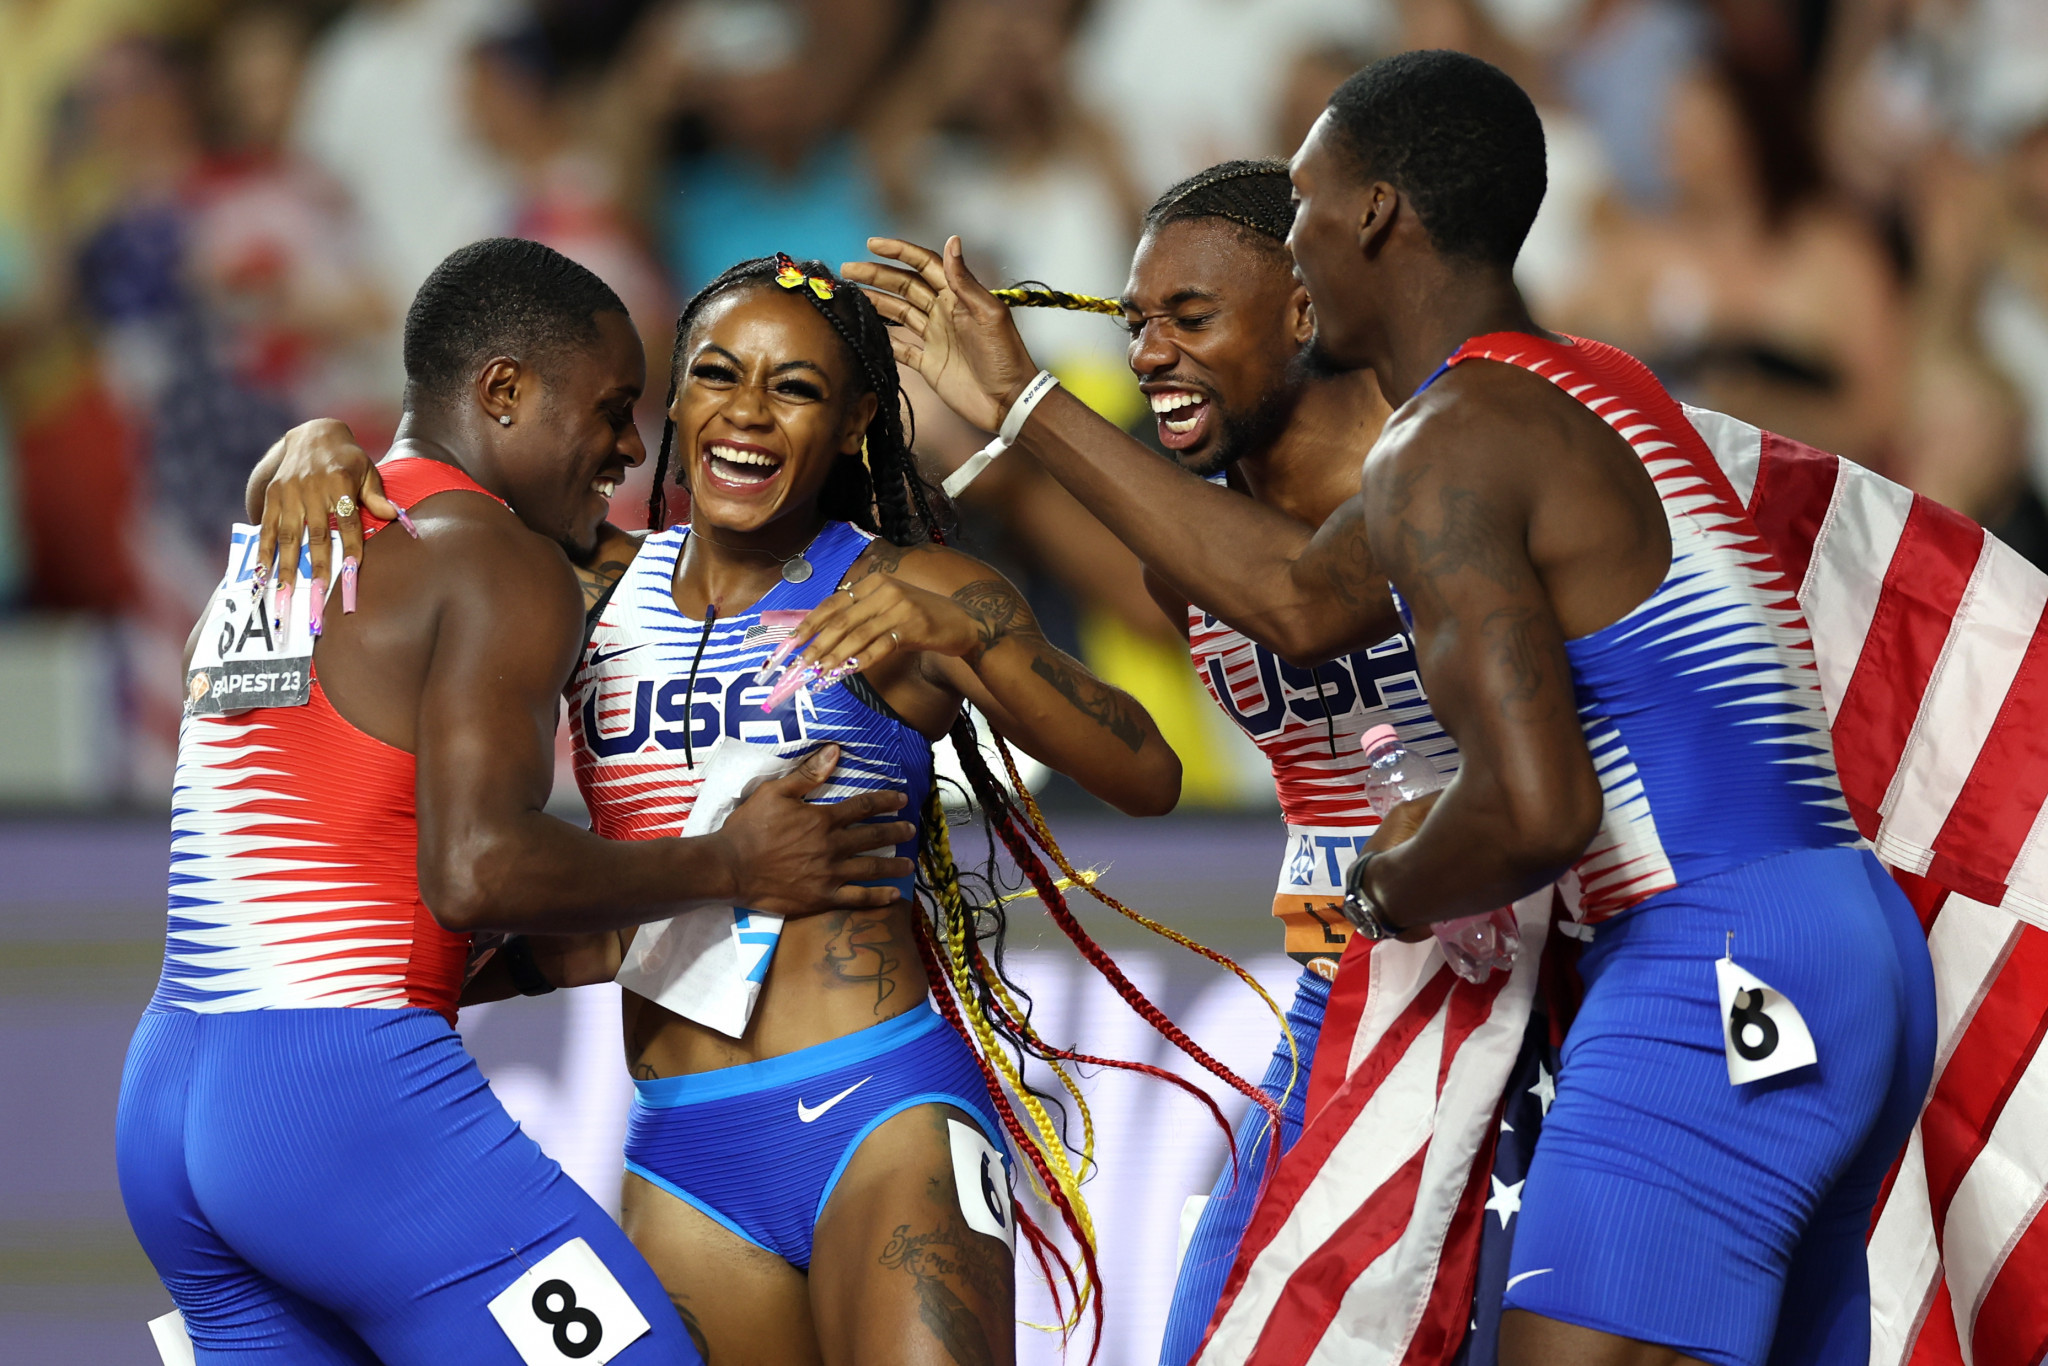 Lyles and Richardson anchor US to 4x100m relay double at World Athletics Championships